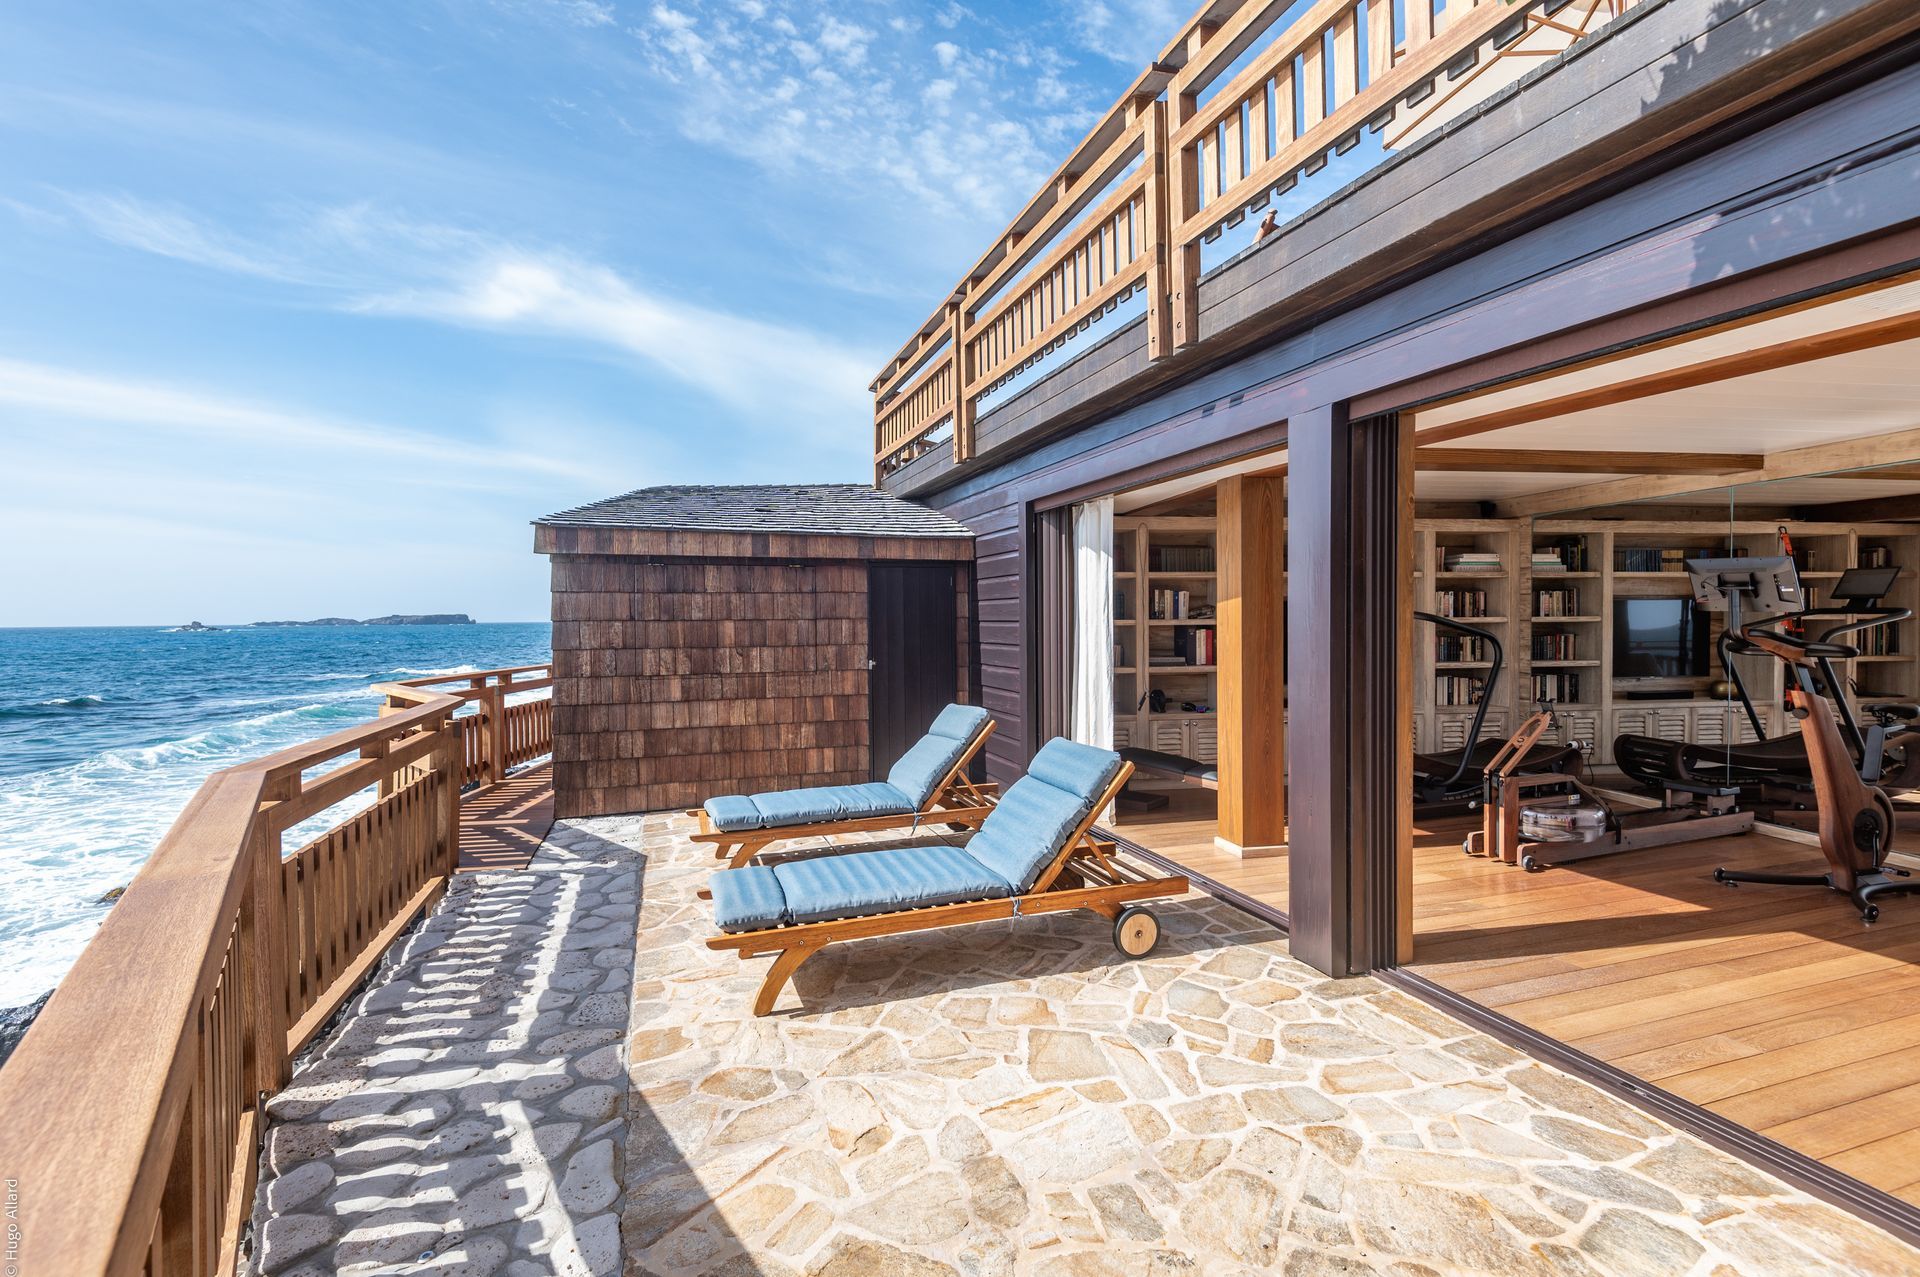 there are two lounge chairs on the balcony of a house with a view of the ocean